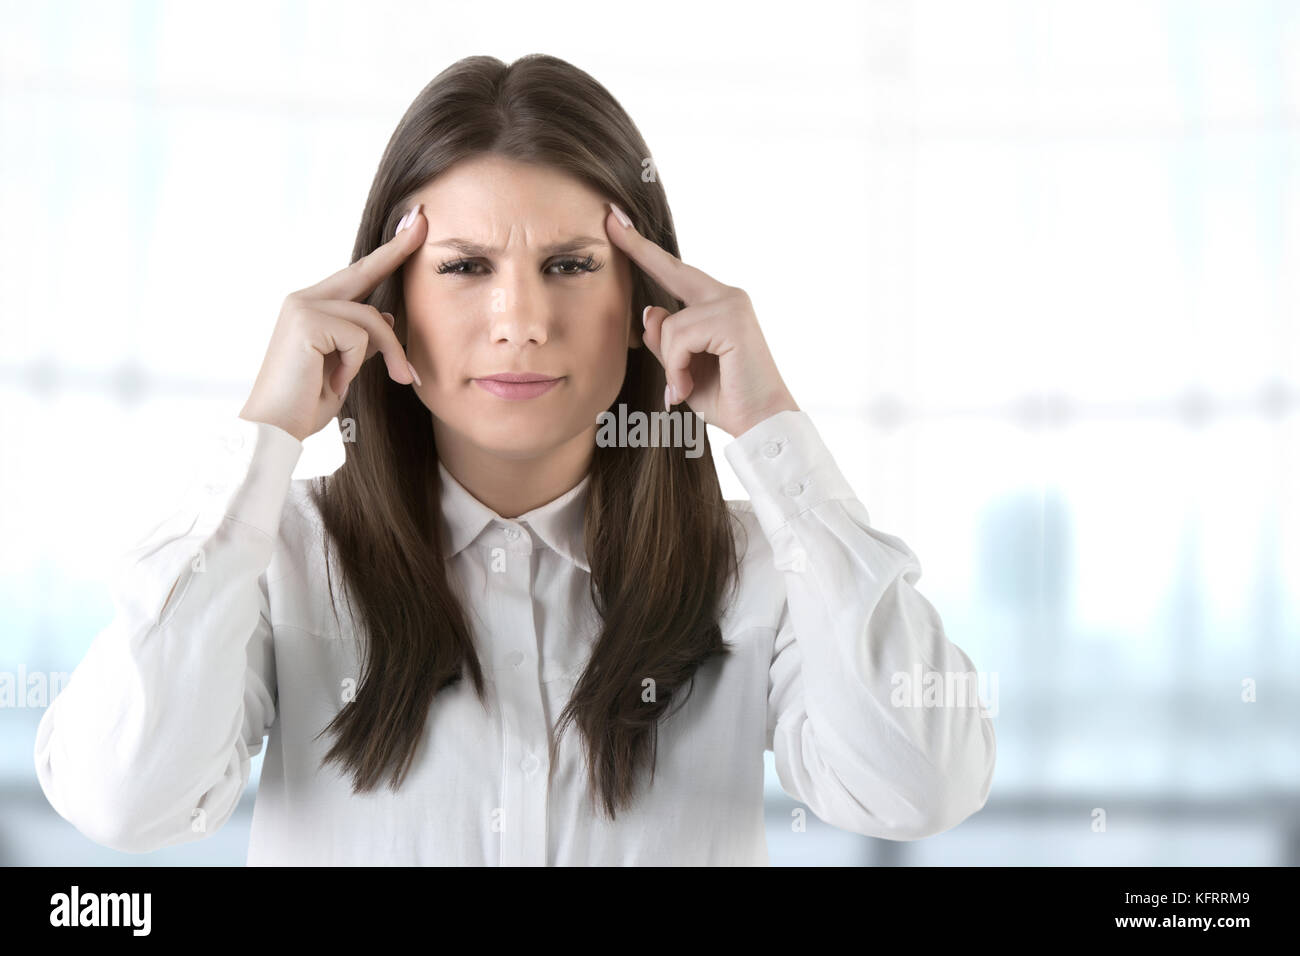 Woman suffering from an headache, holding her hand to the head Stock Photo